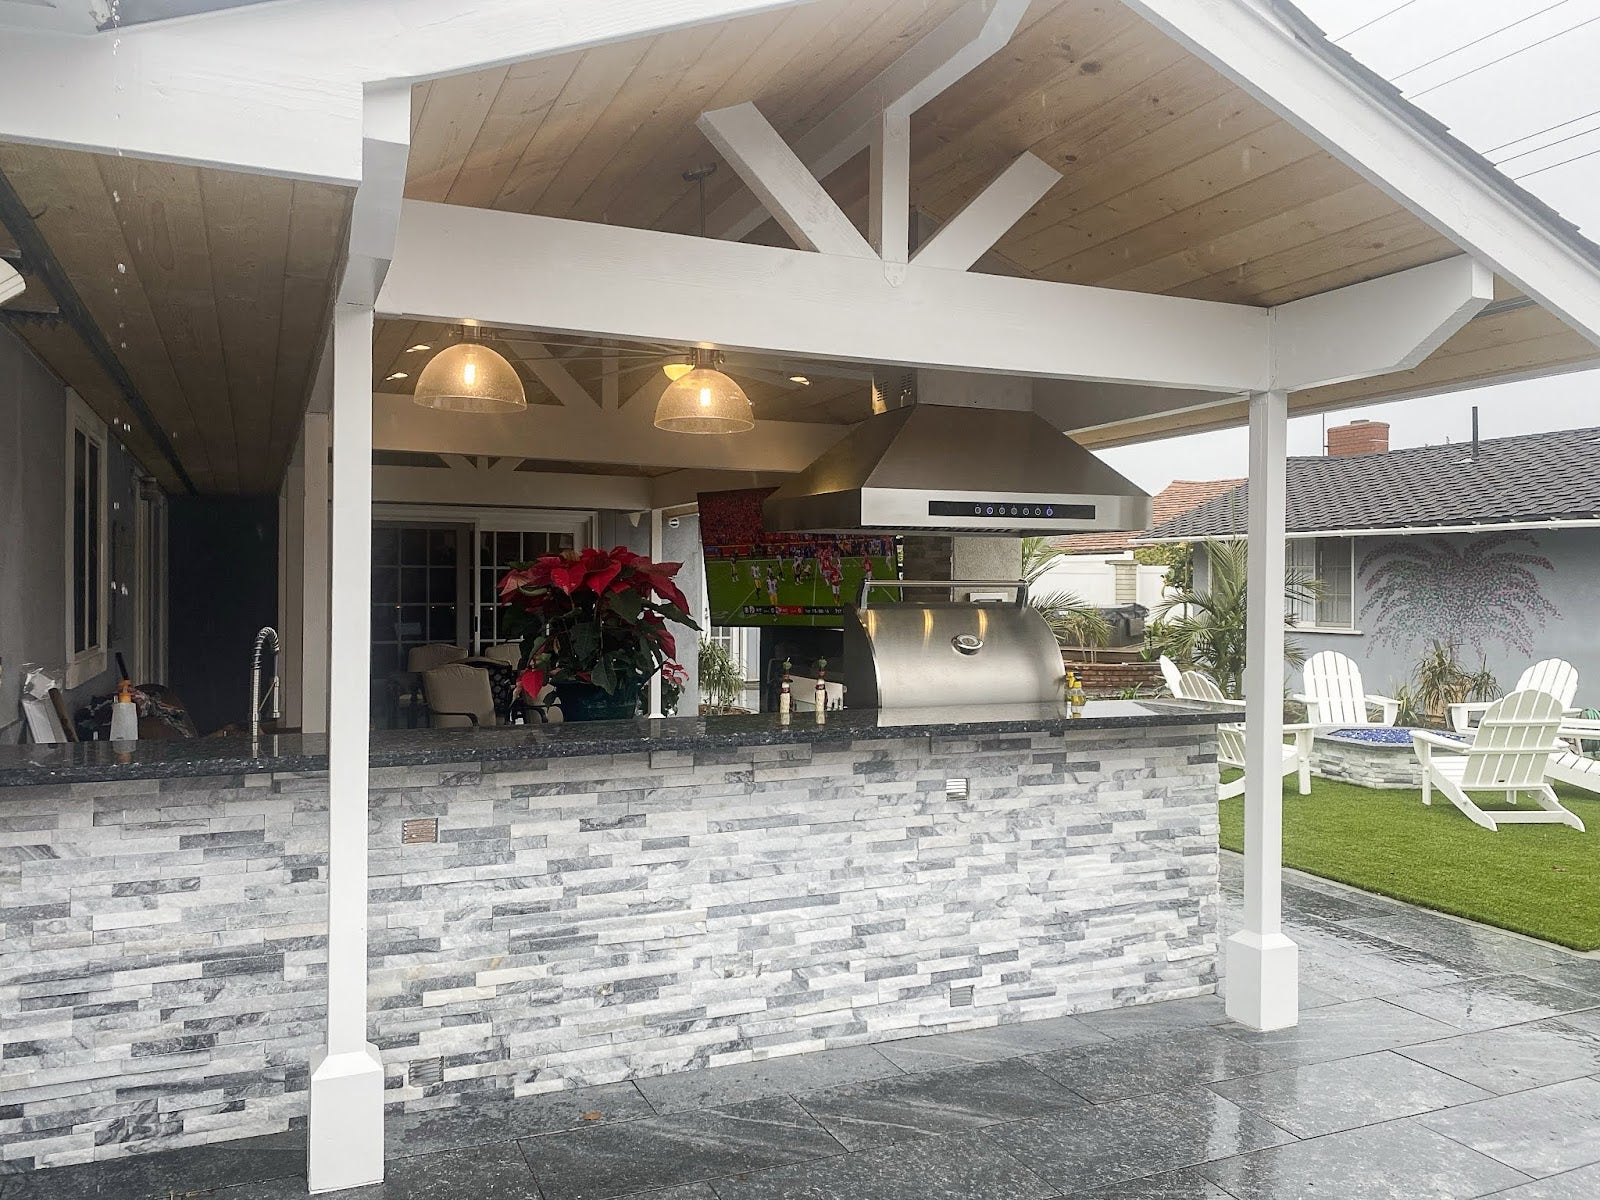 Open-air kitchen with Proline range hood, stone wall detailing, and comfortable outdoor seating - prolinerangehoods.com